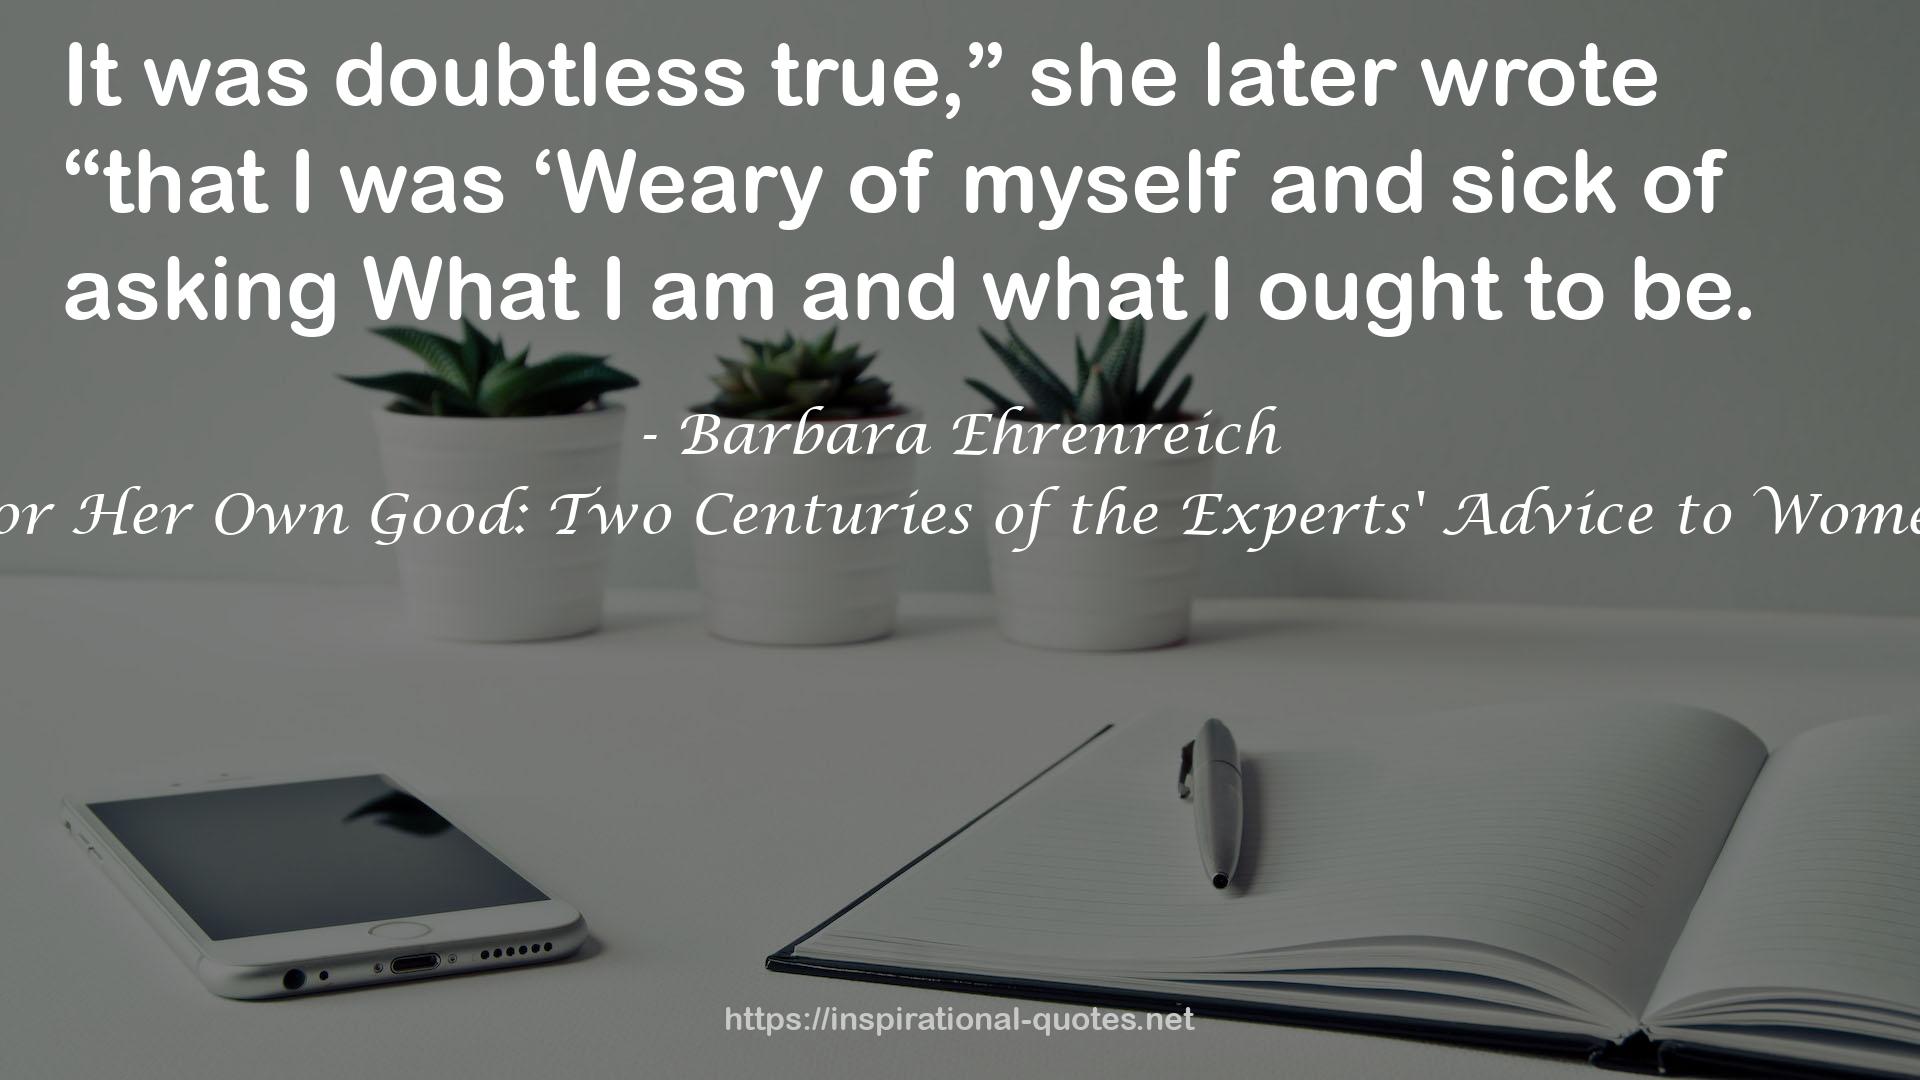 For Her Own Good: Two Centuries of the Experts' Advice to Women QUOTES